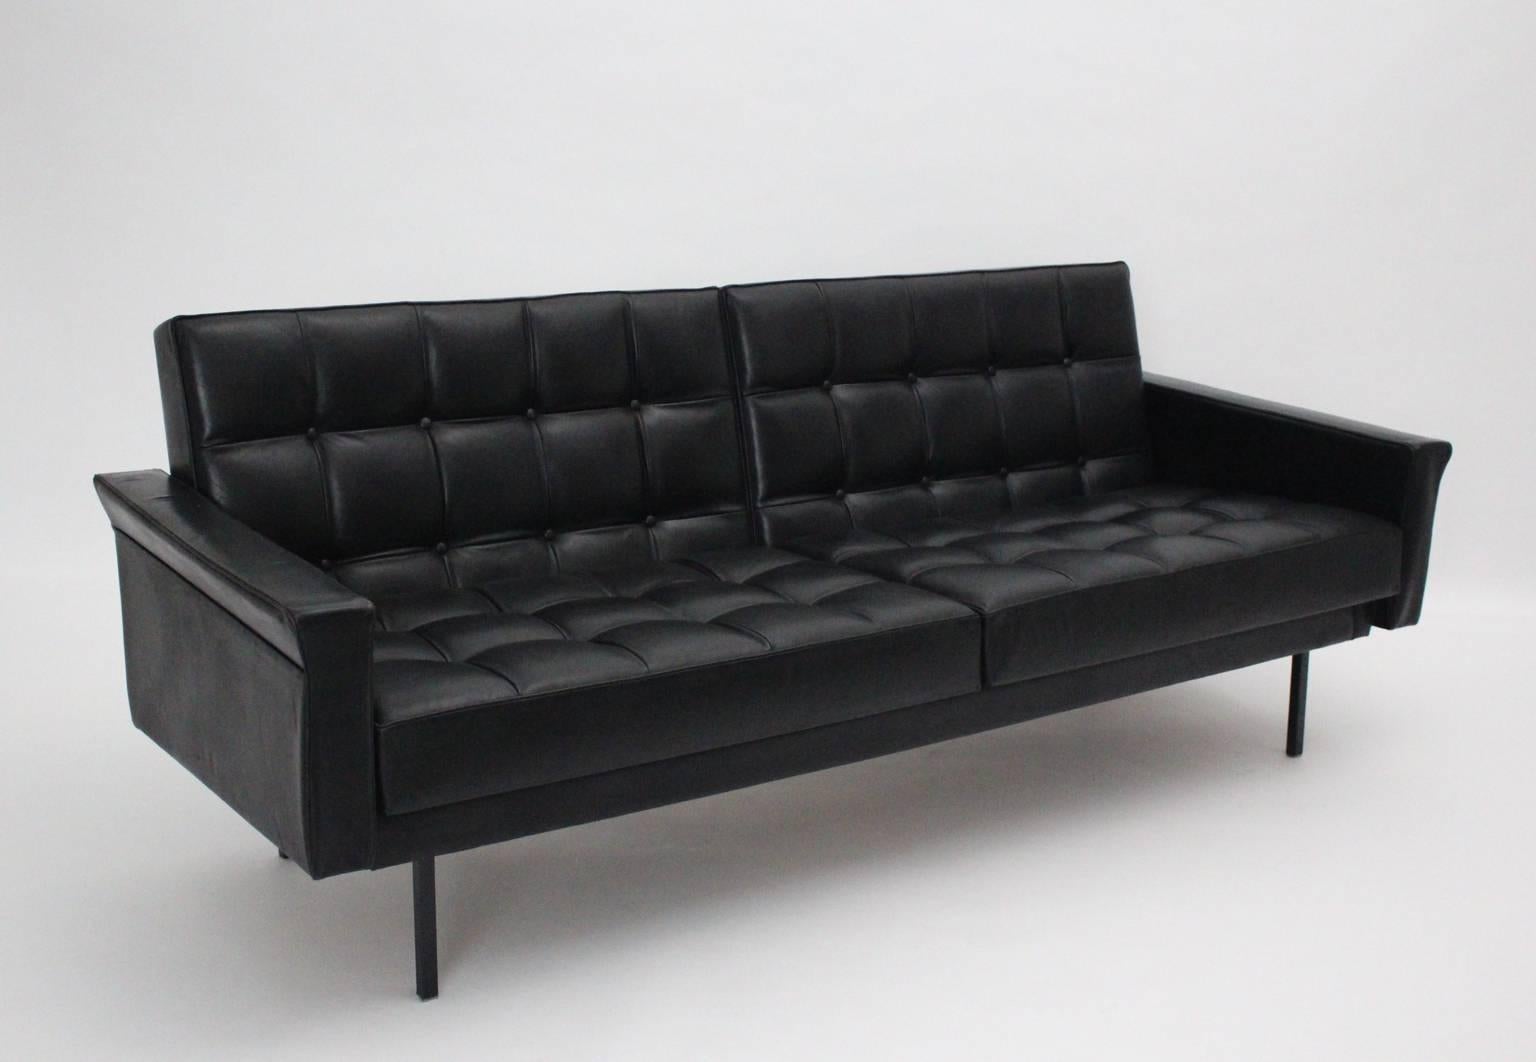 Mid Century Modern black vintage leather sofa or bench by Johannes Spalt circa 1960 Vienna.
The freestanding black leather sofa shows tufted leather stitching with buttons.
Two loose seat cushions and two loose back cushions promise a comfortable